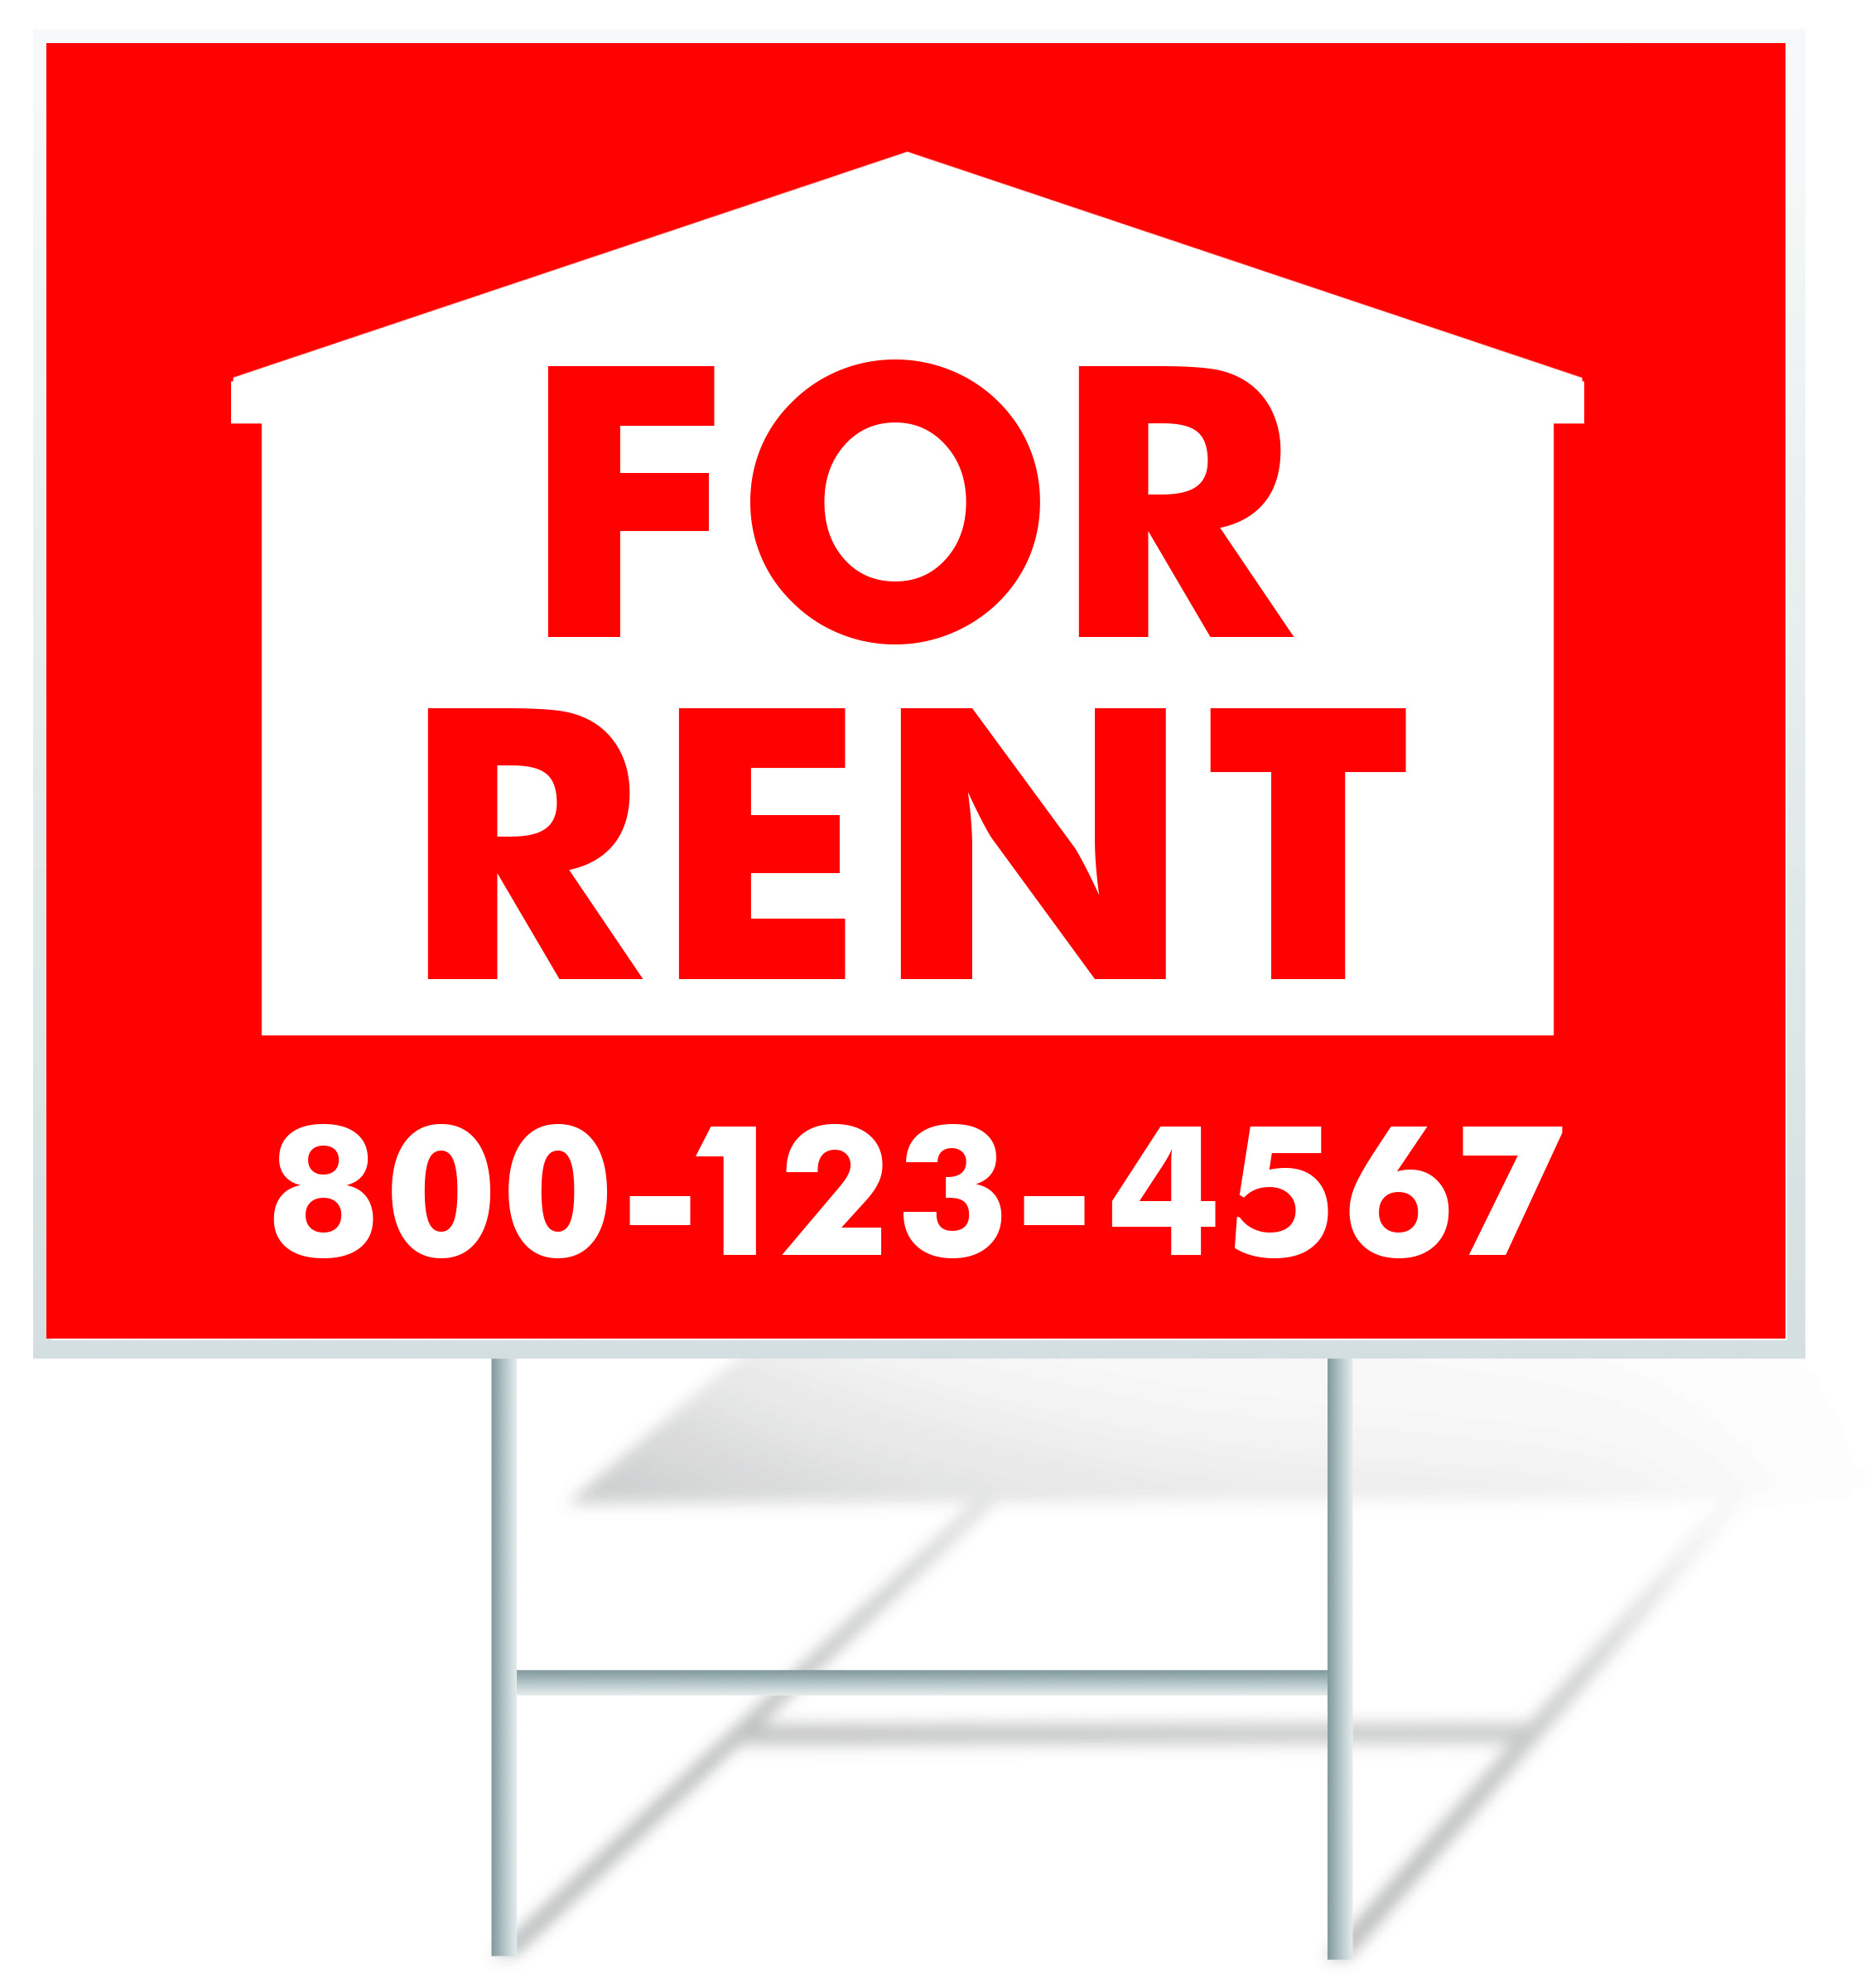 Apartment Lawn Sign Example | LawnSigns.com